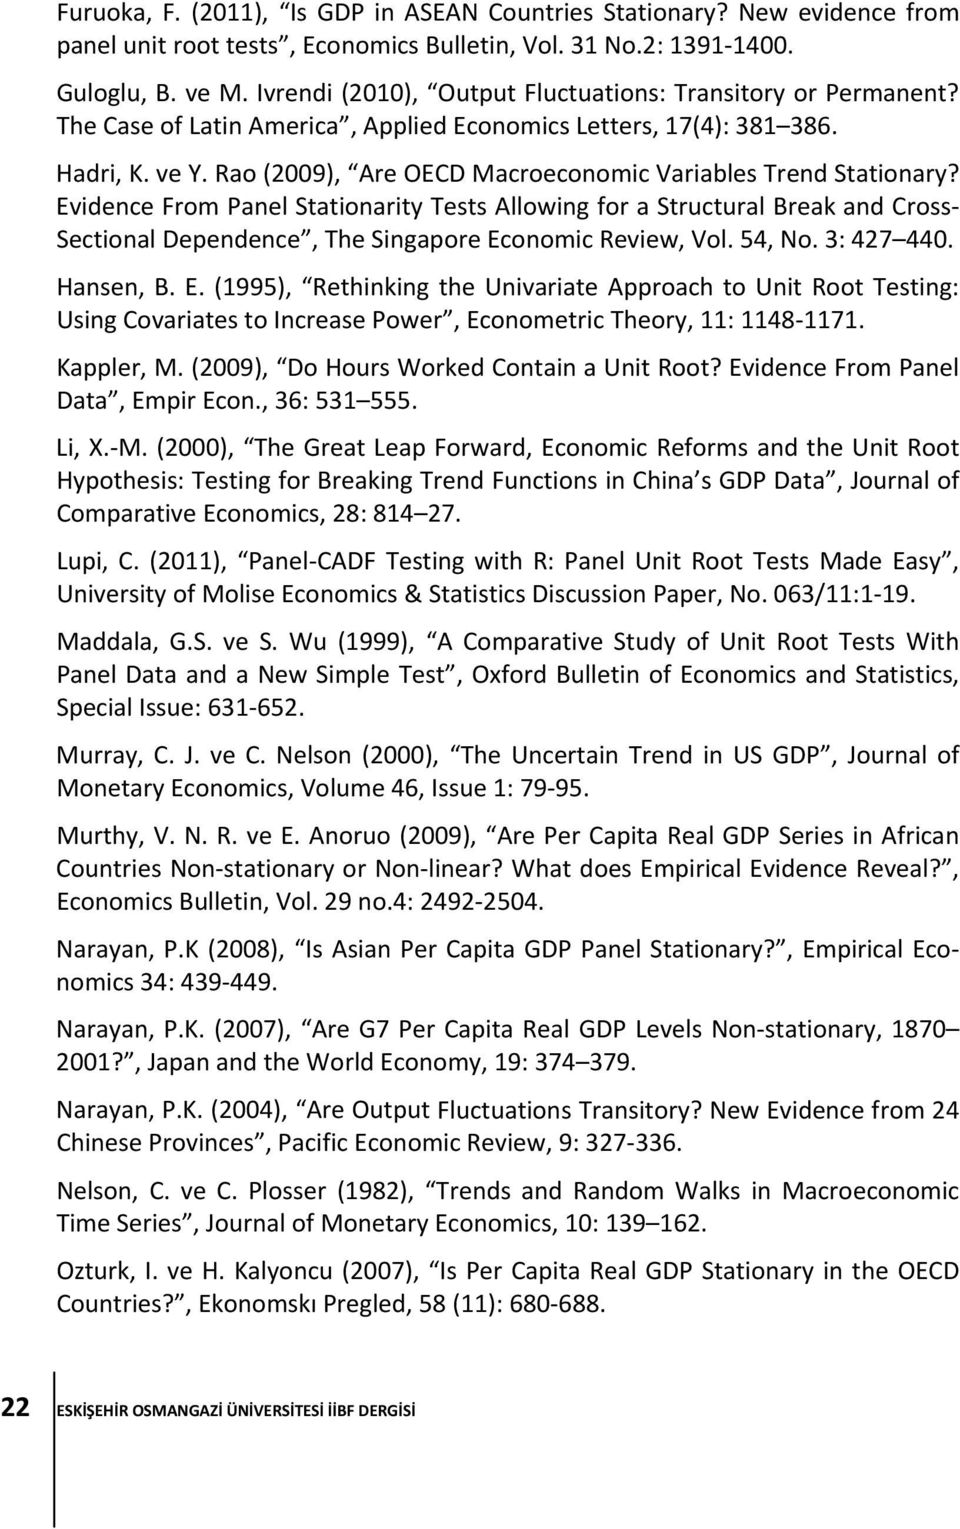 Rao (2009), Are OECD Macroeconomic Variables Trend Stationary?